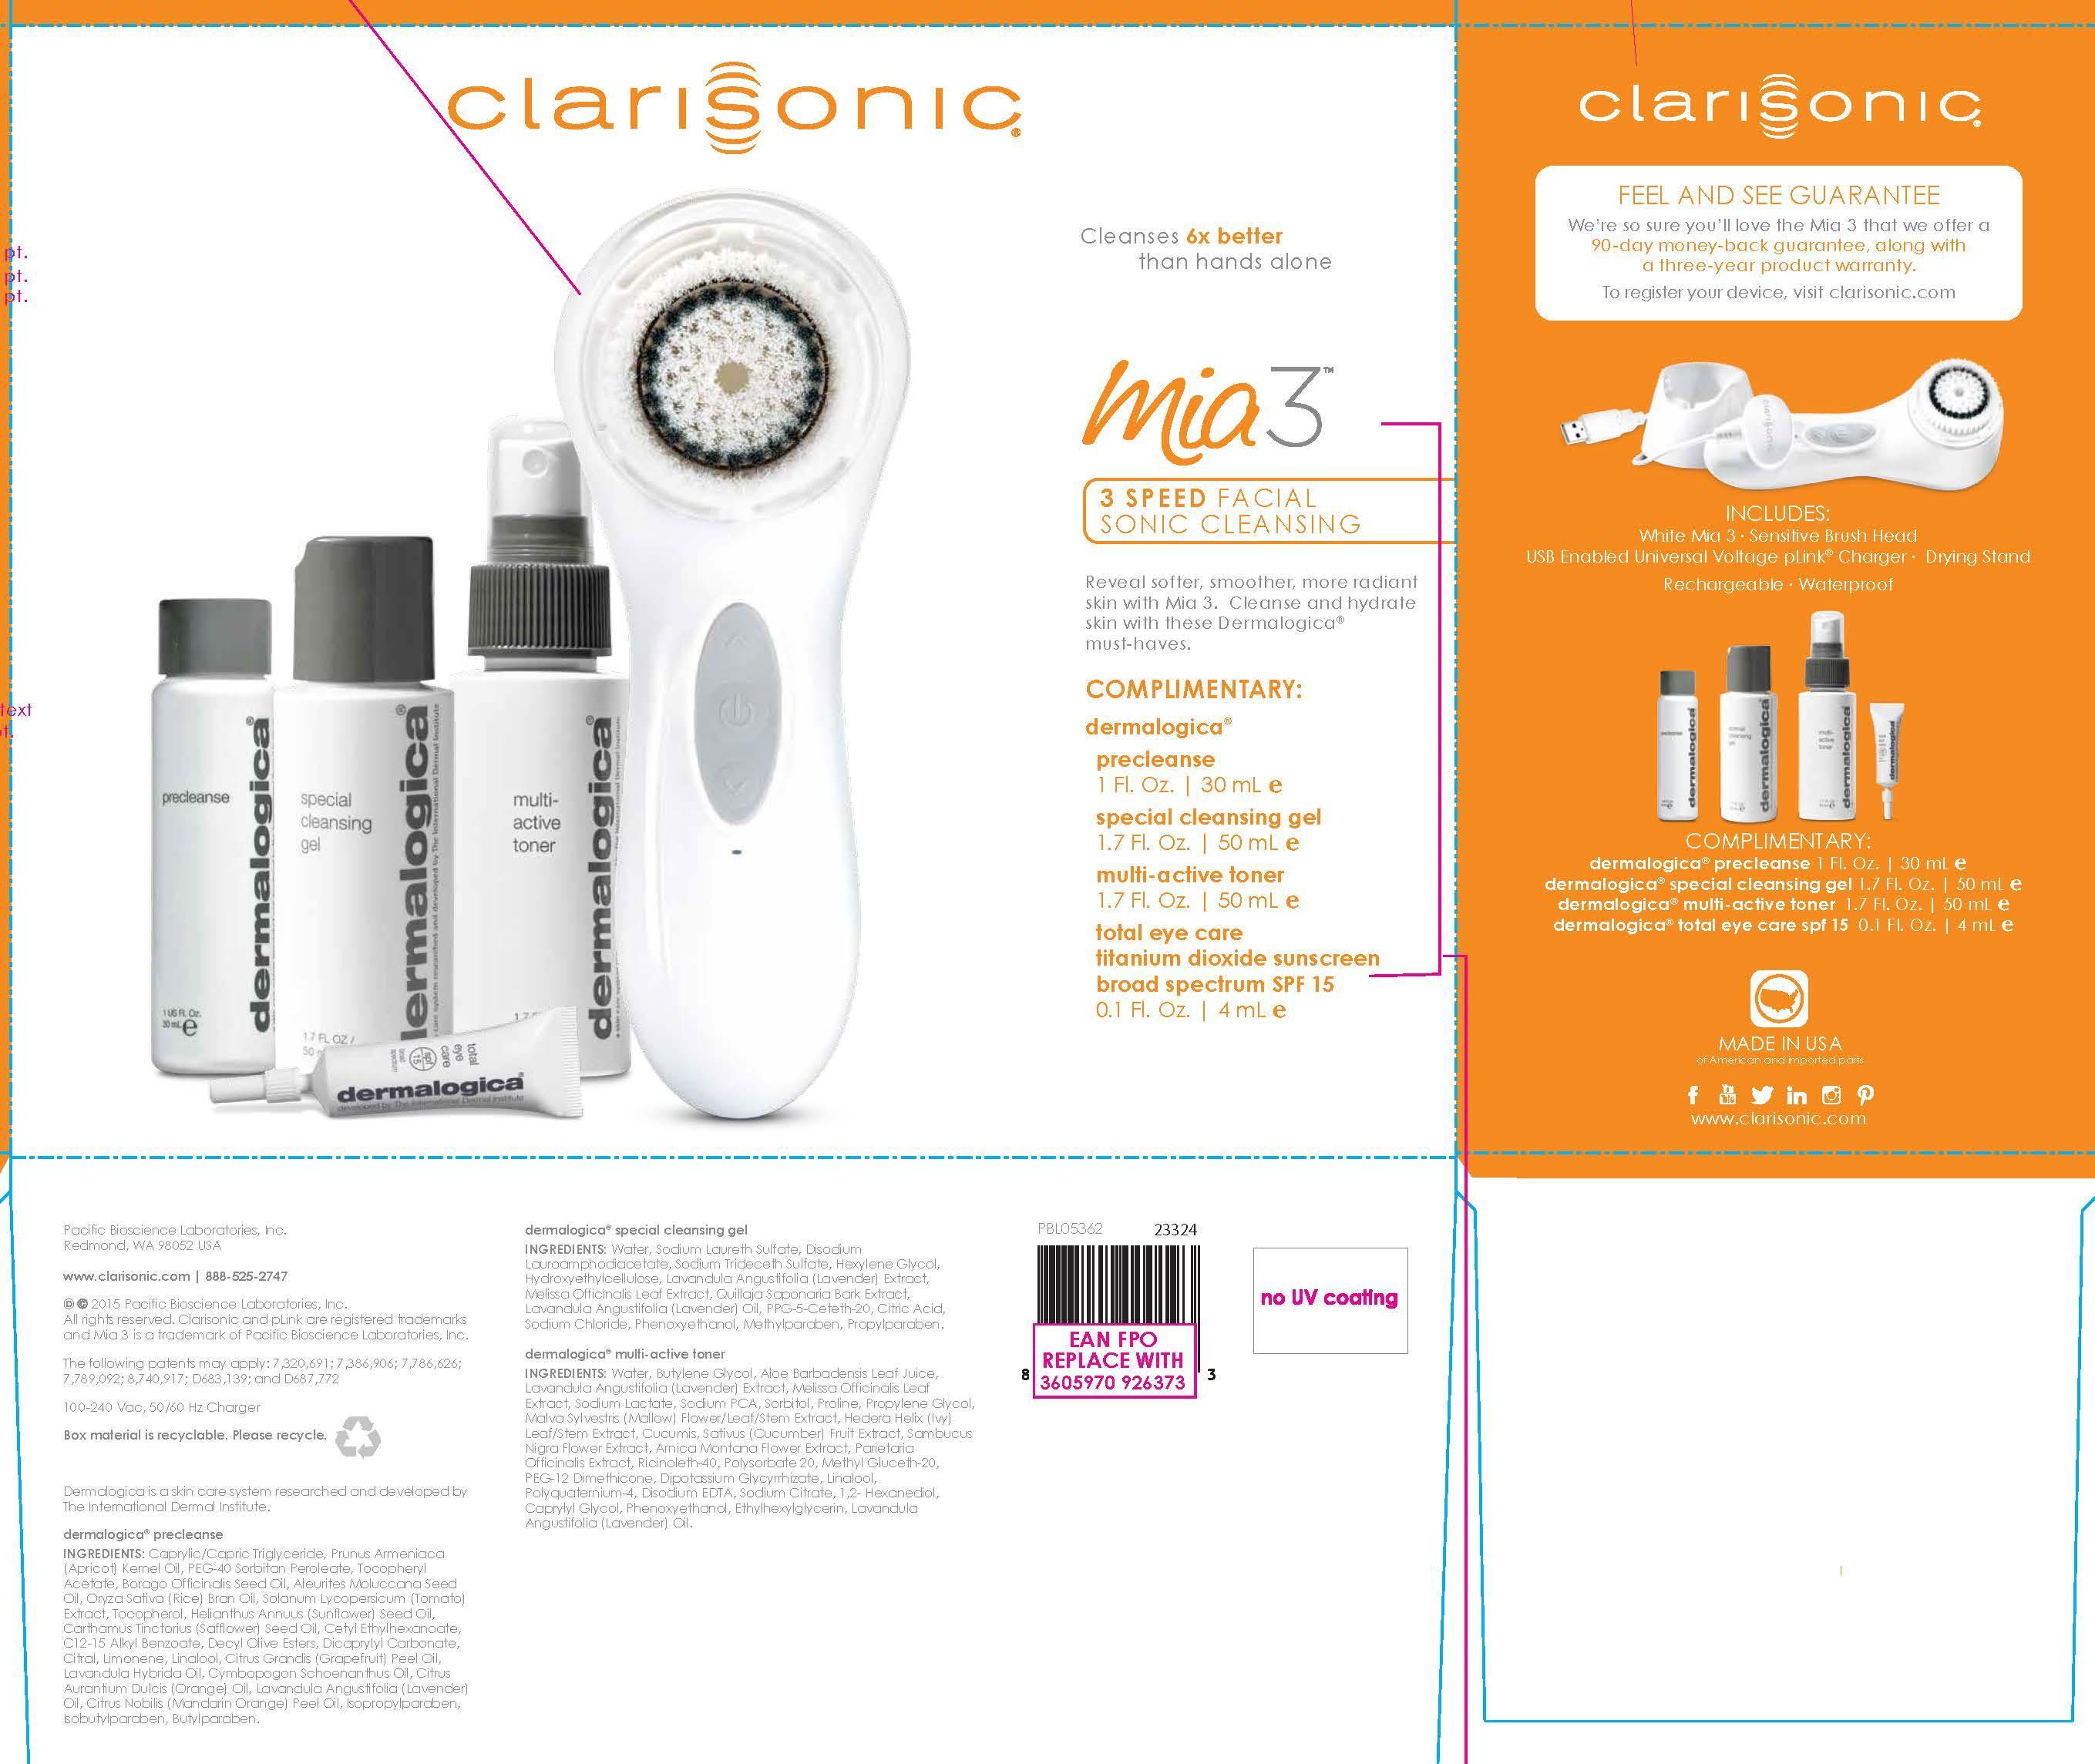 Clarisonic Mia 3 Facial Sonic Cleansing Brush With Dermalogica Total Eye Care Broad Spectrum Spf 15 Sunscreen Breastfeeding